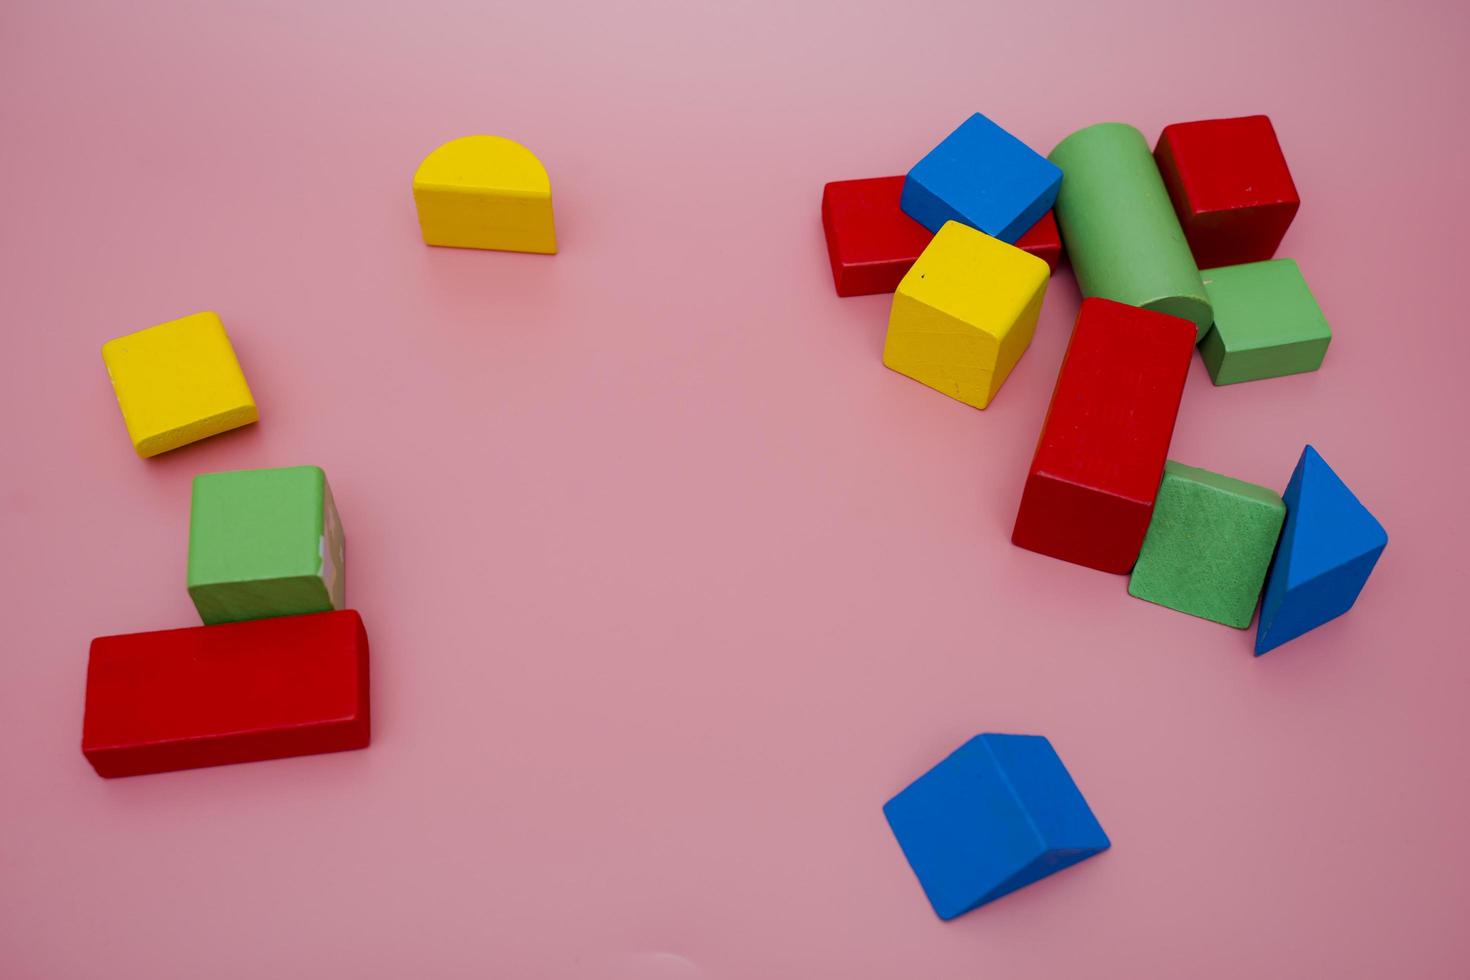 Colorful wooden blocks on pink background. Creativity toys. Children's building blocks. Geometric shapes - cube, triangular prism, cylinder. The concept of logical thinking. photo